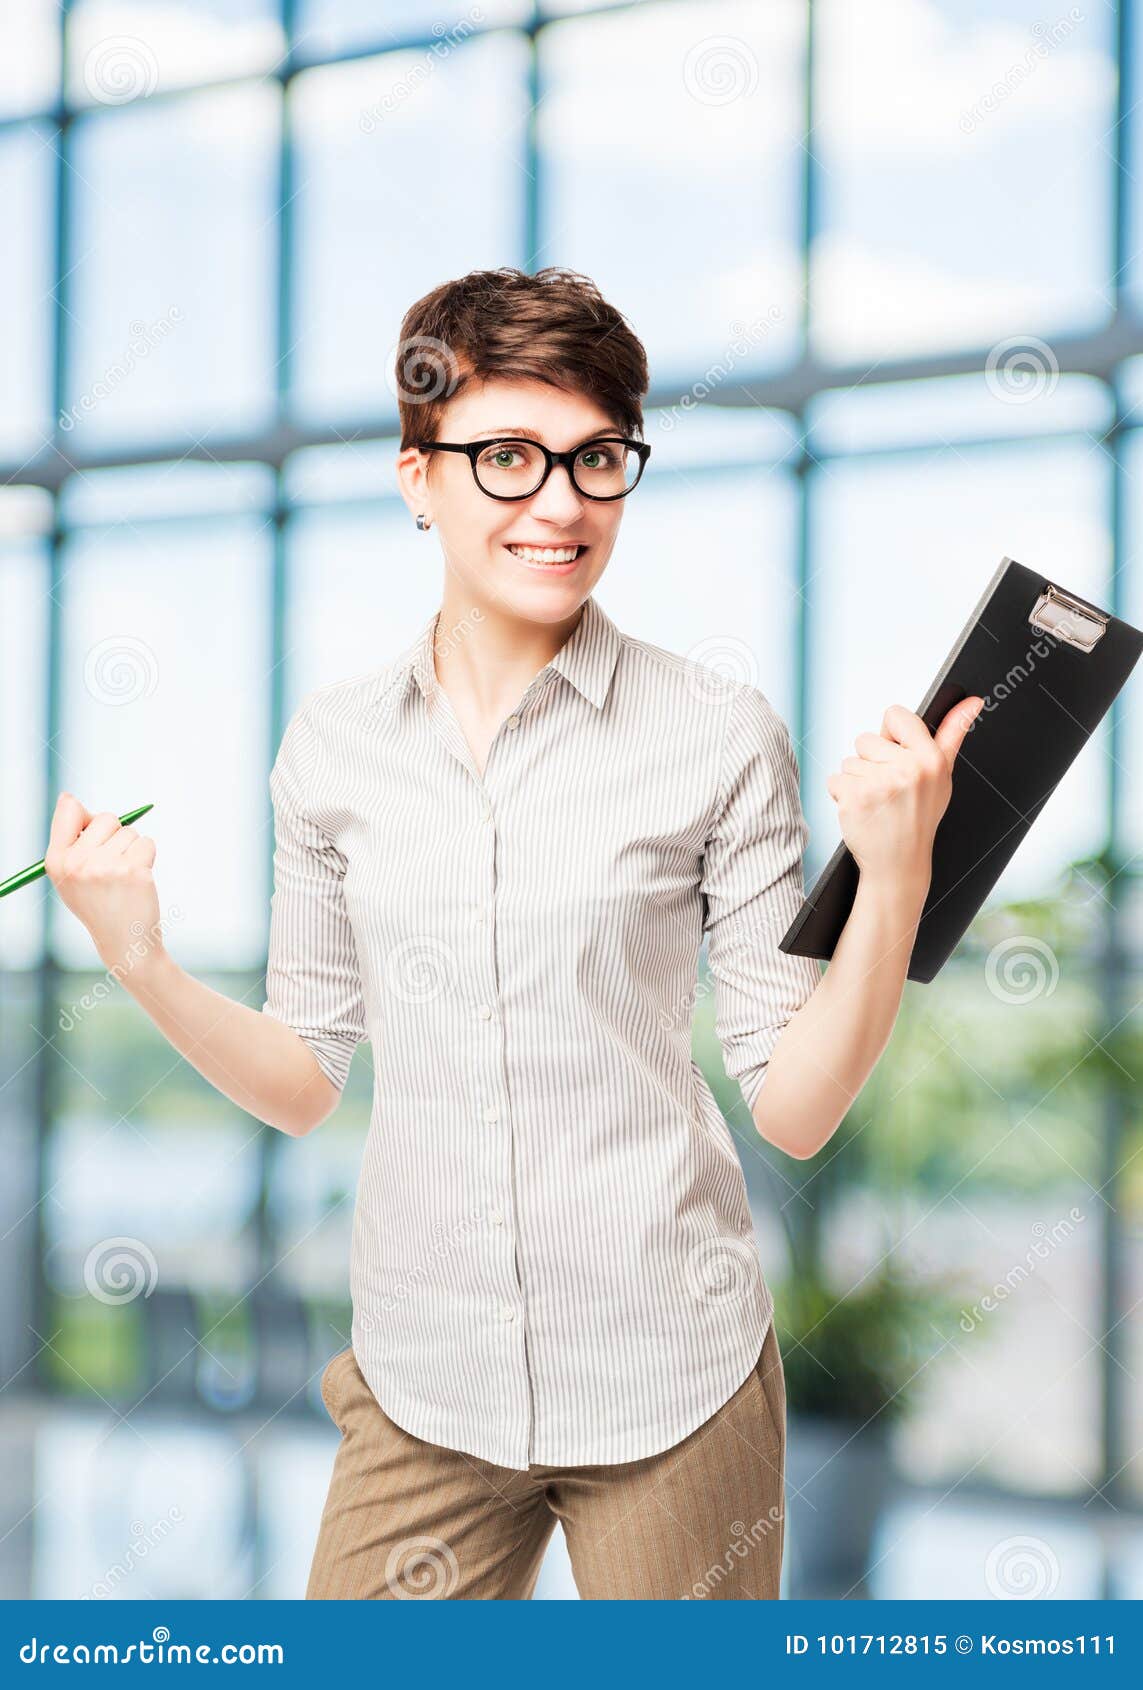 Vertical Portrait Of A Happy Successful Business Woman Stock Image